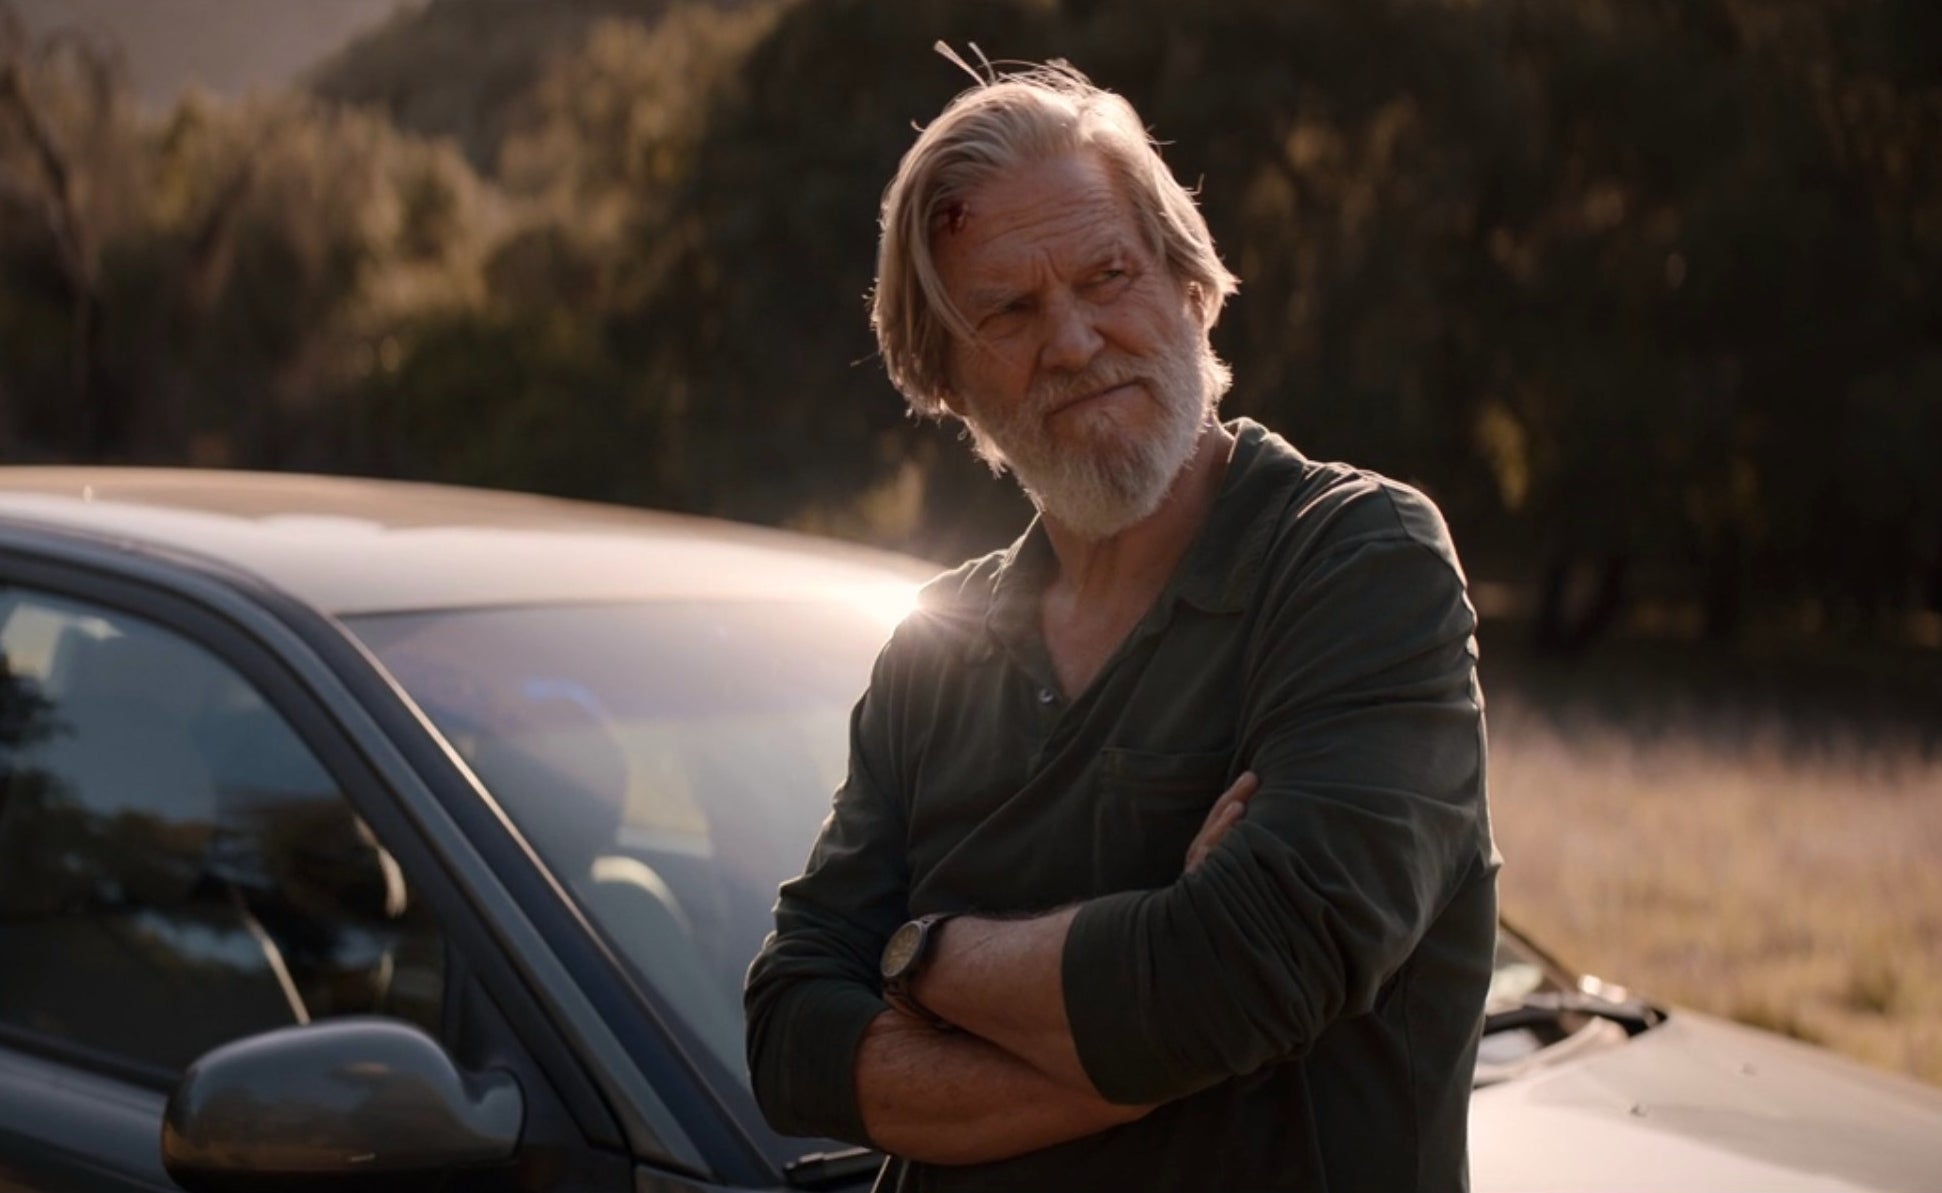 Jeff Bridges leaning on the hood of a car in Episode 3 of The Old Man